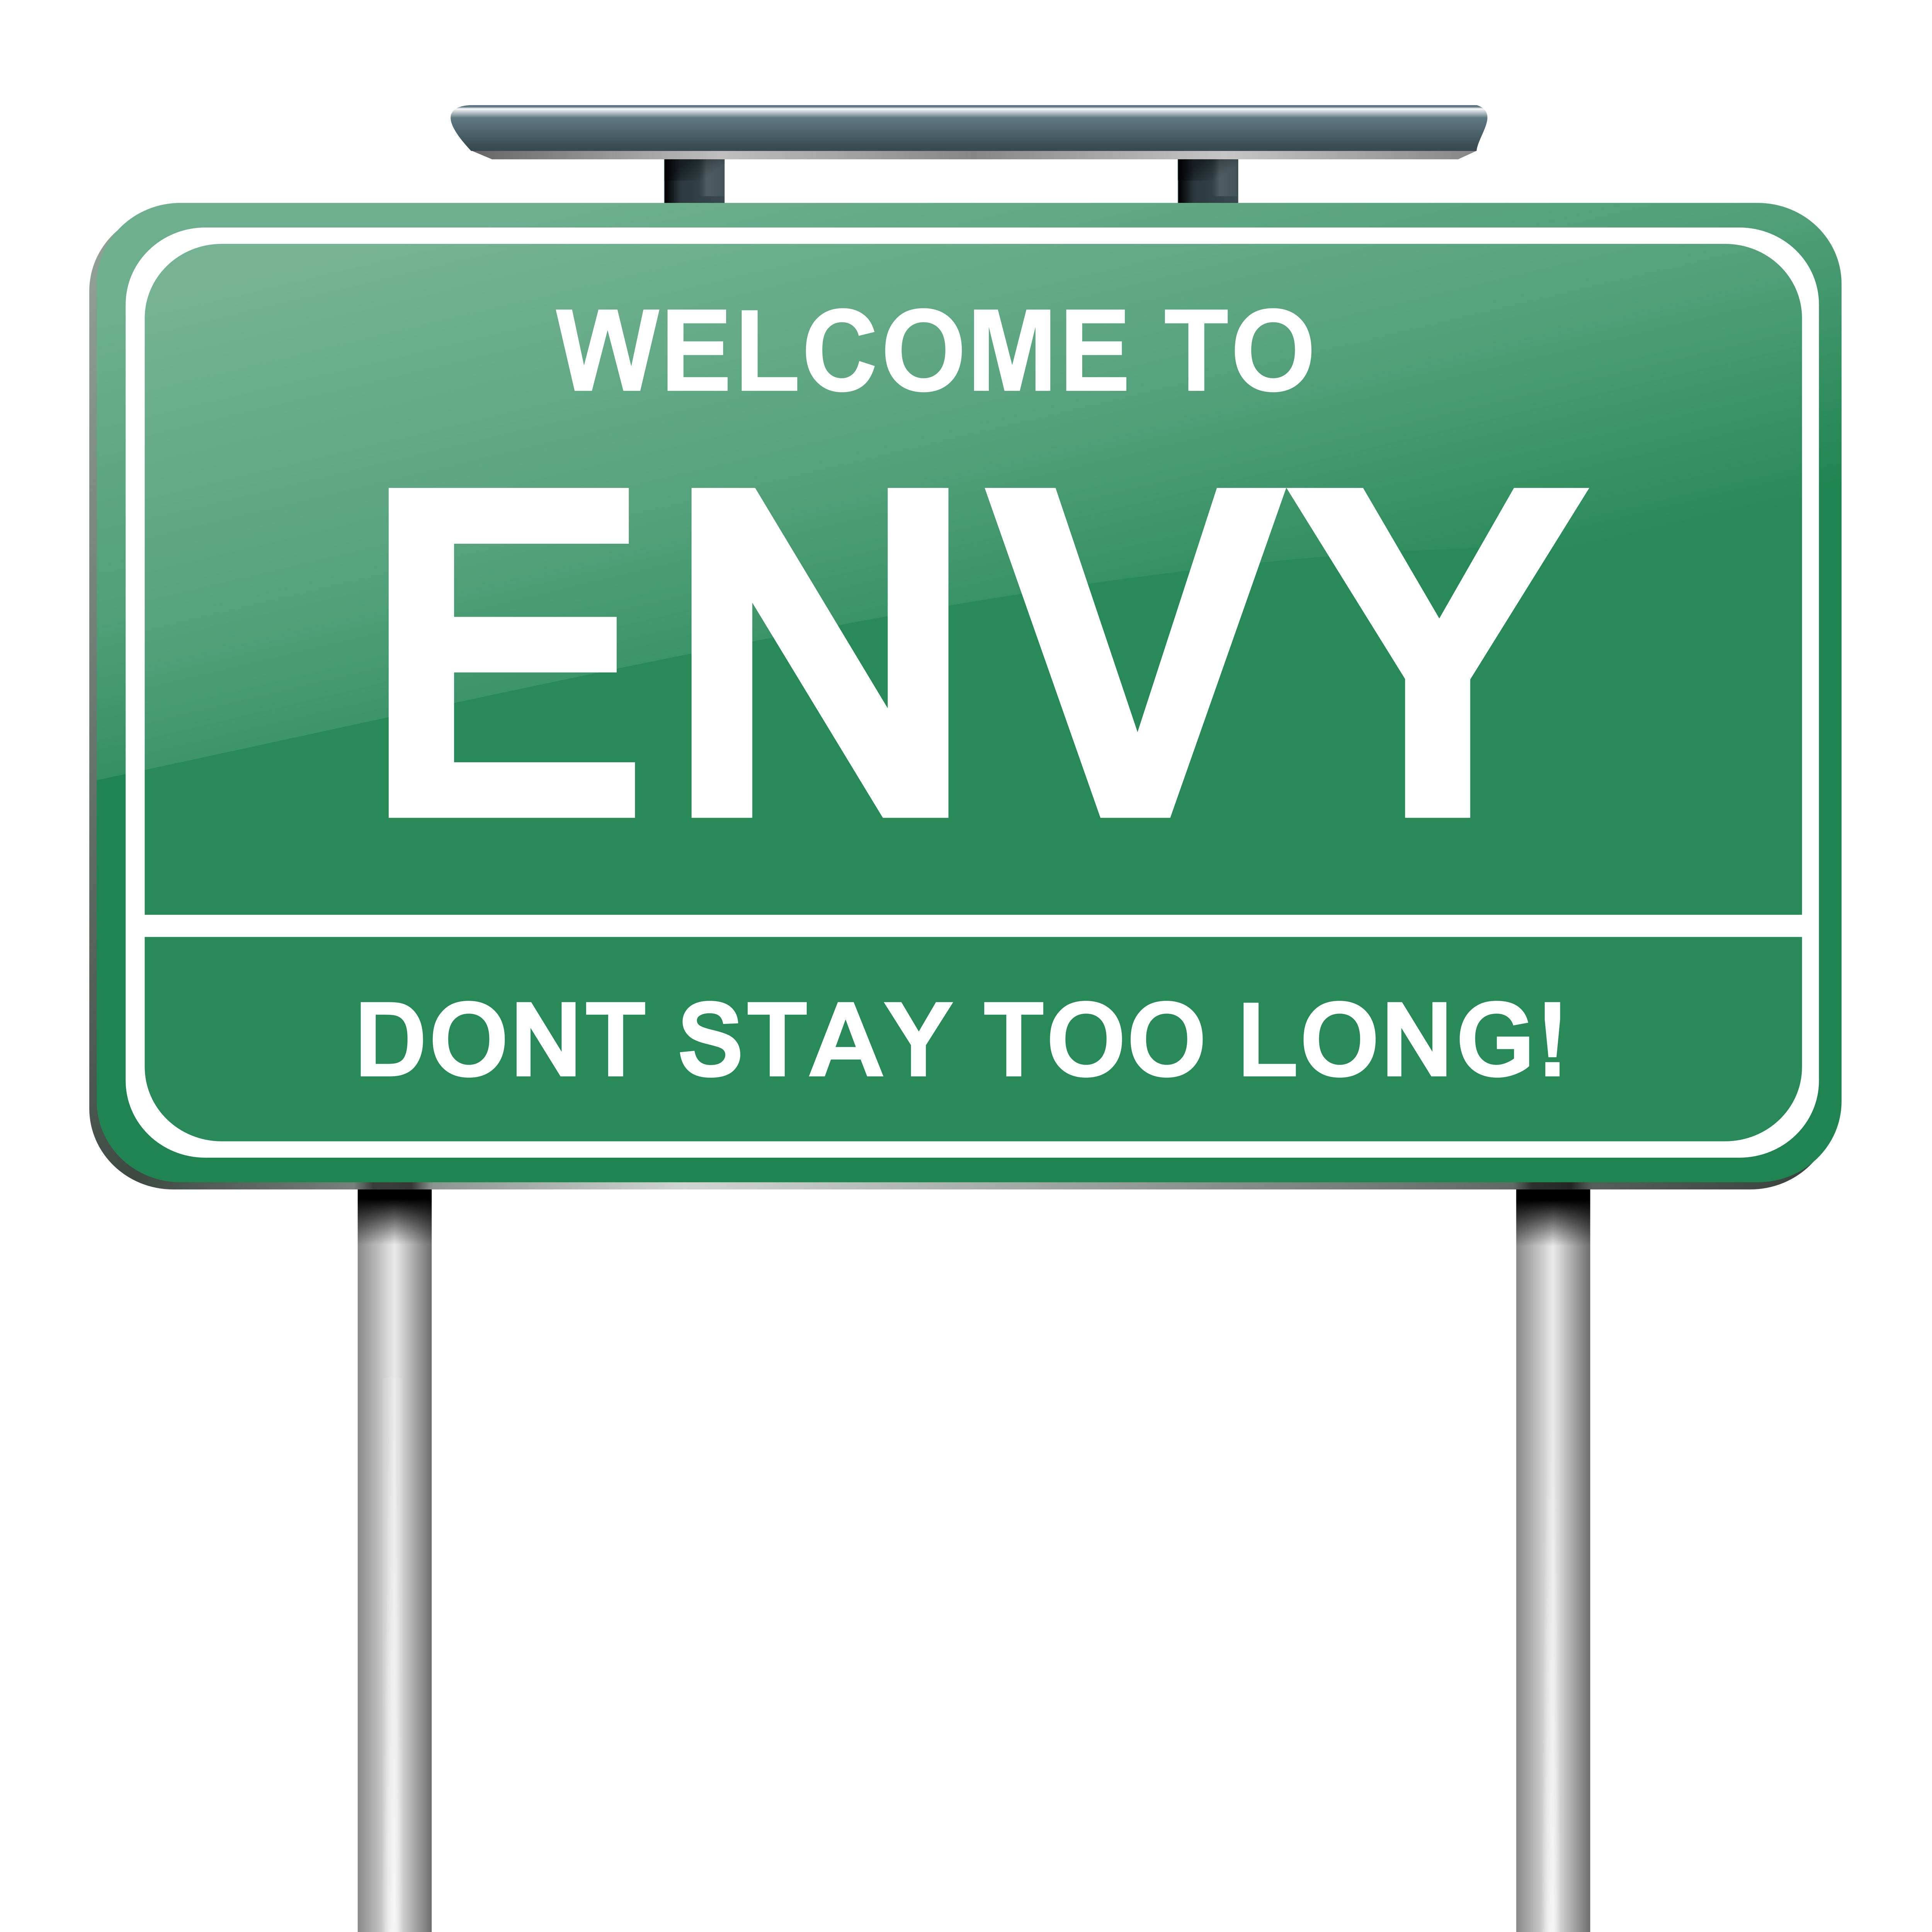 Знак Envy. To be Green with Envy. Green with Envy idiom. Coping with Envy picture. Dont stays